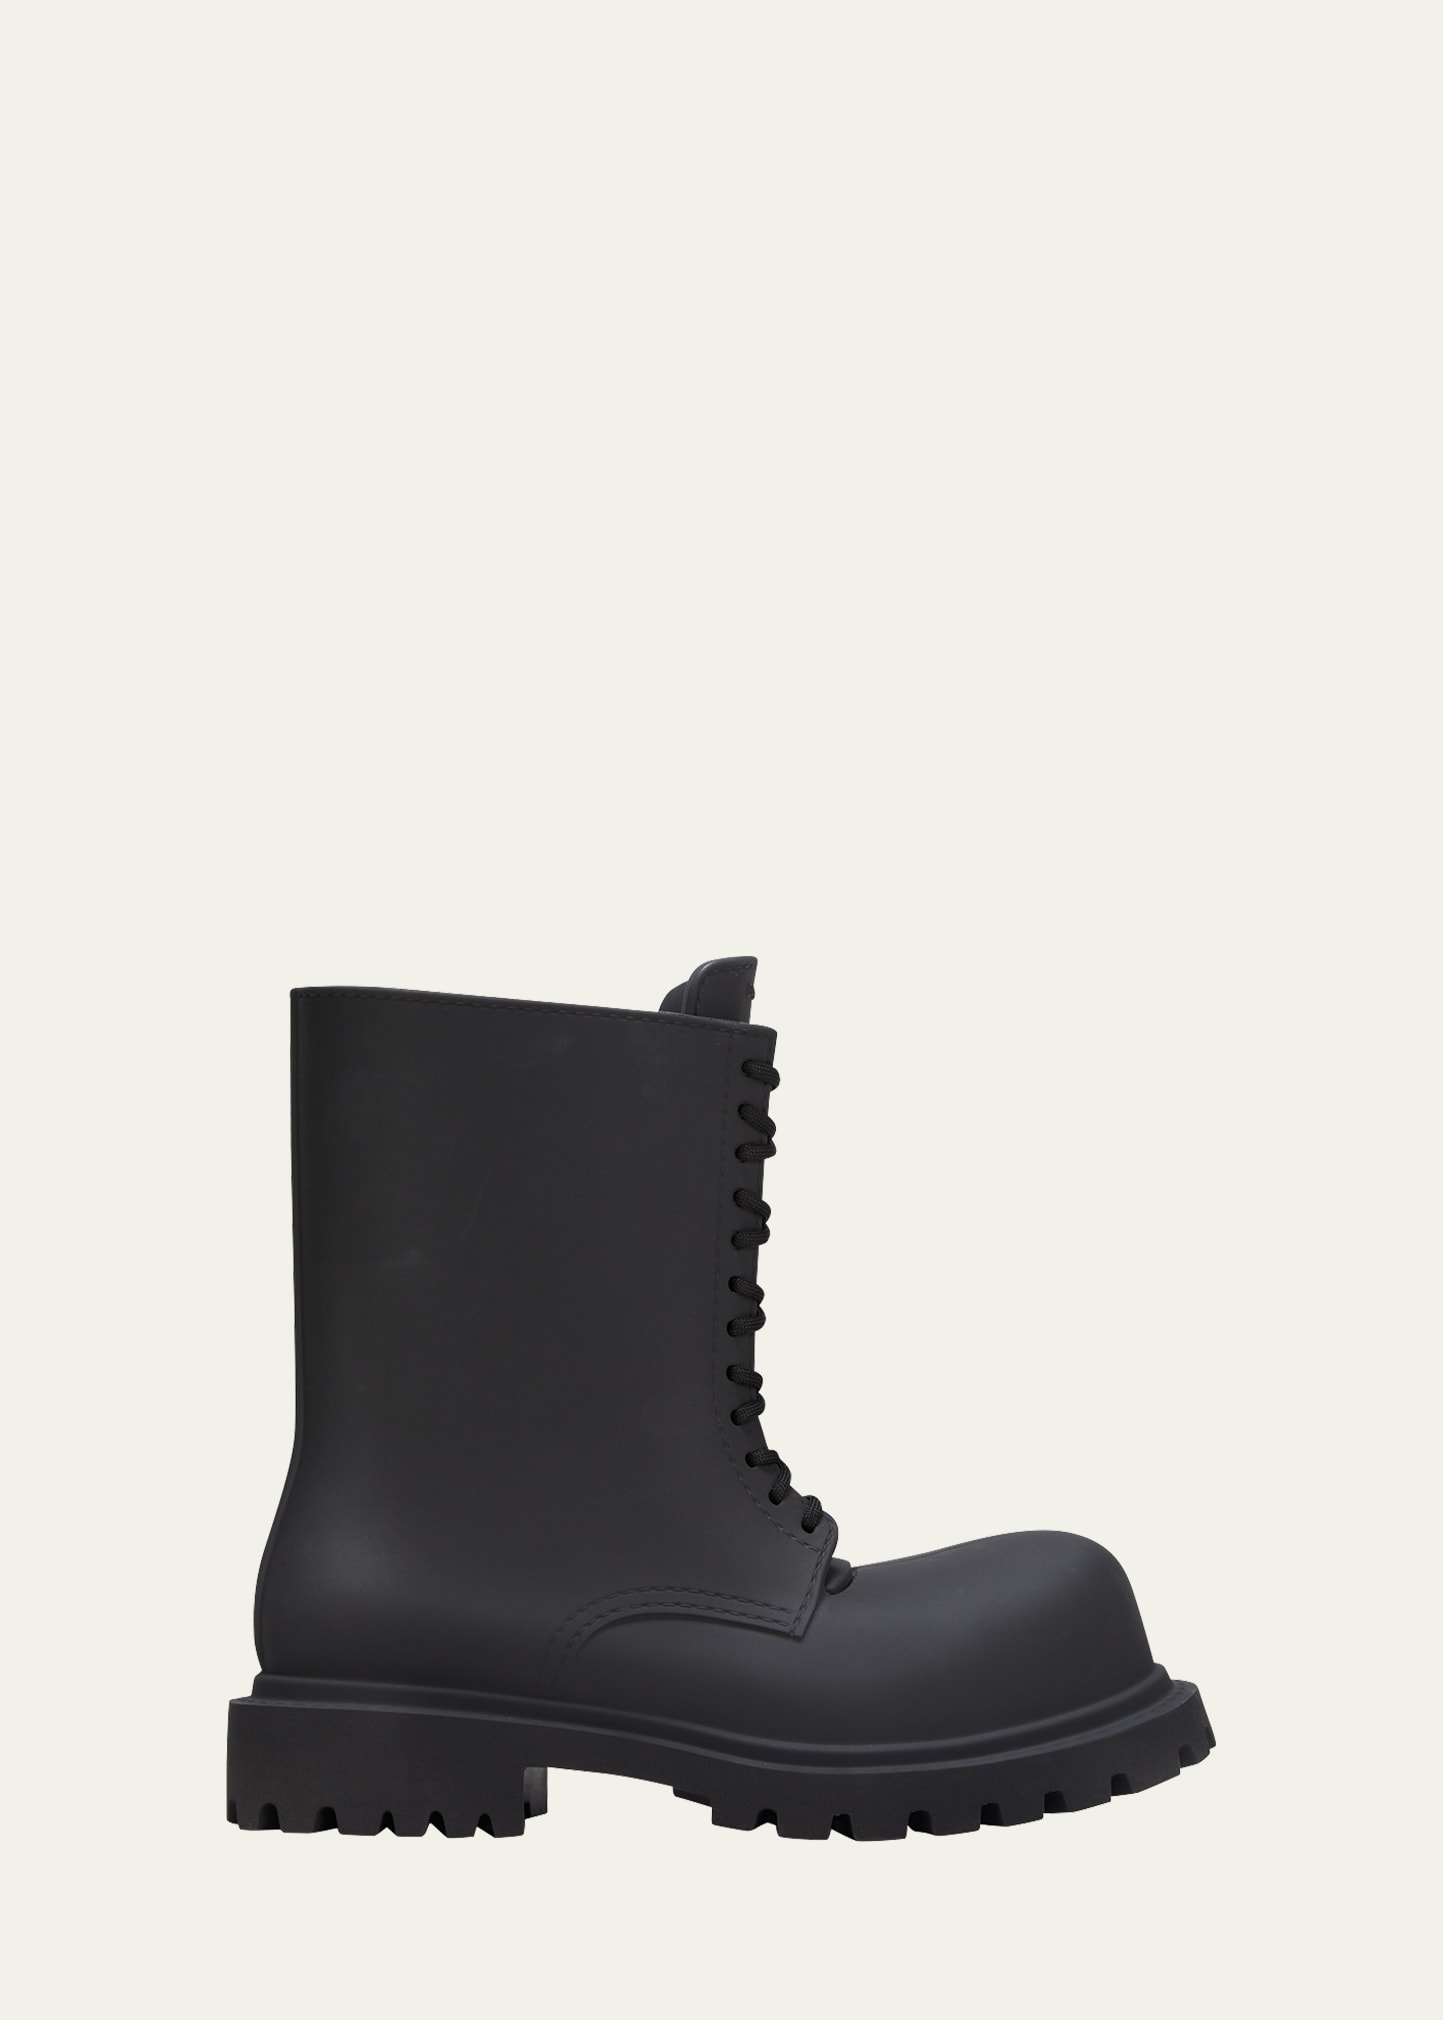 Balenciaga Men's Oversized Leather Army Boots